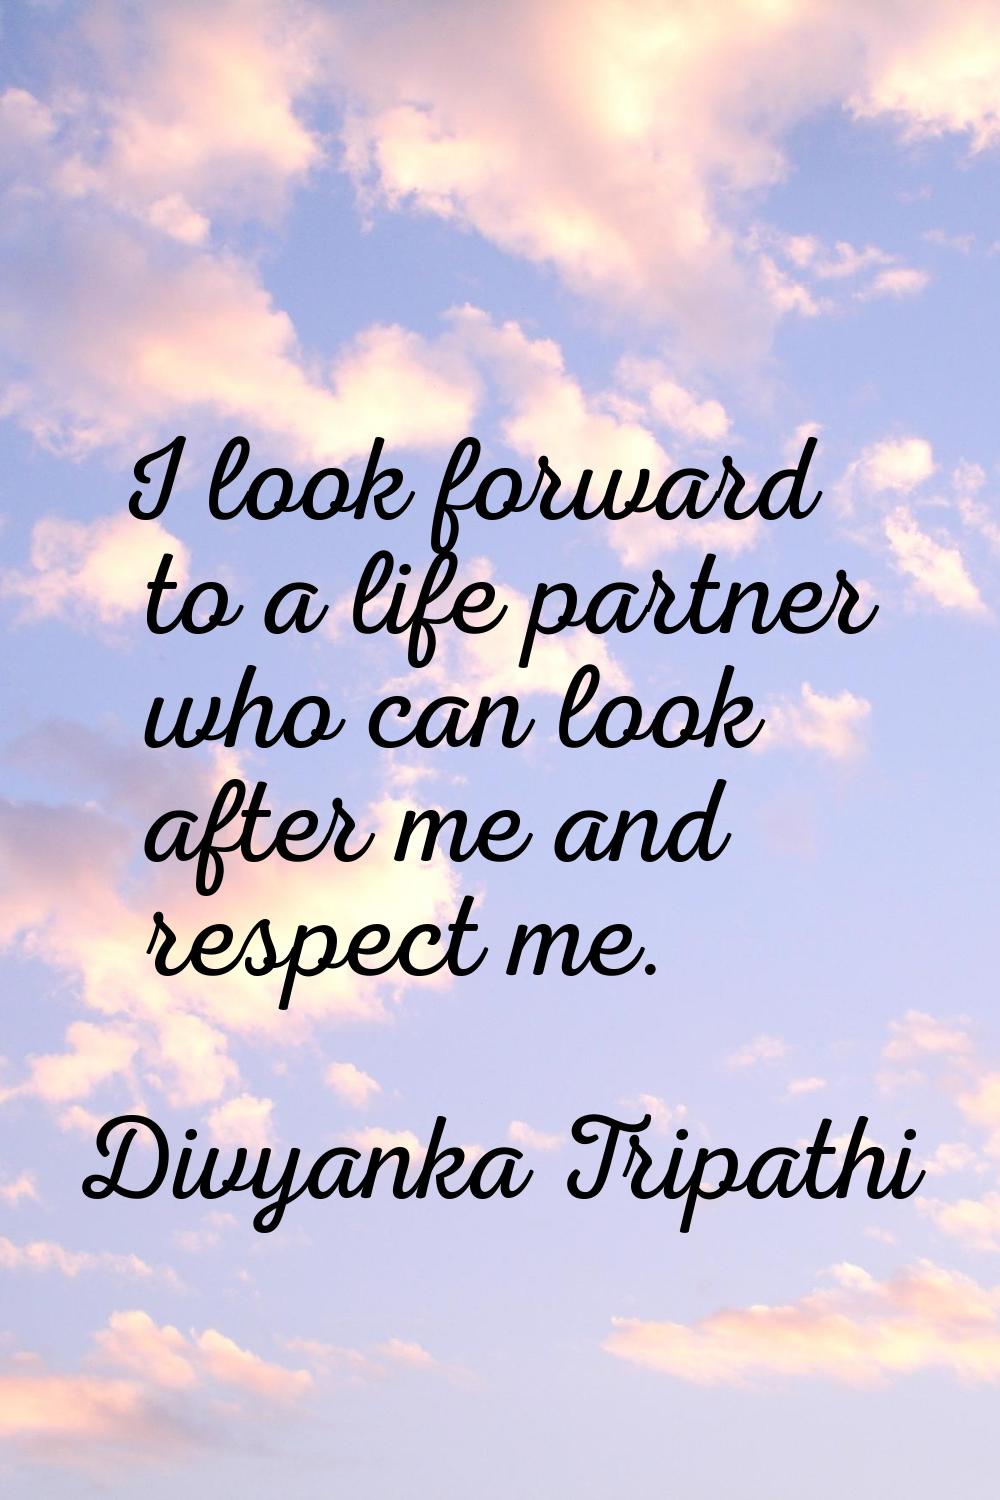 I look forward to a life partner who can look after me and respect me.